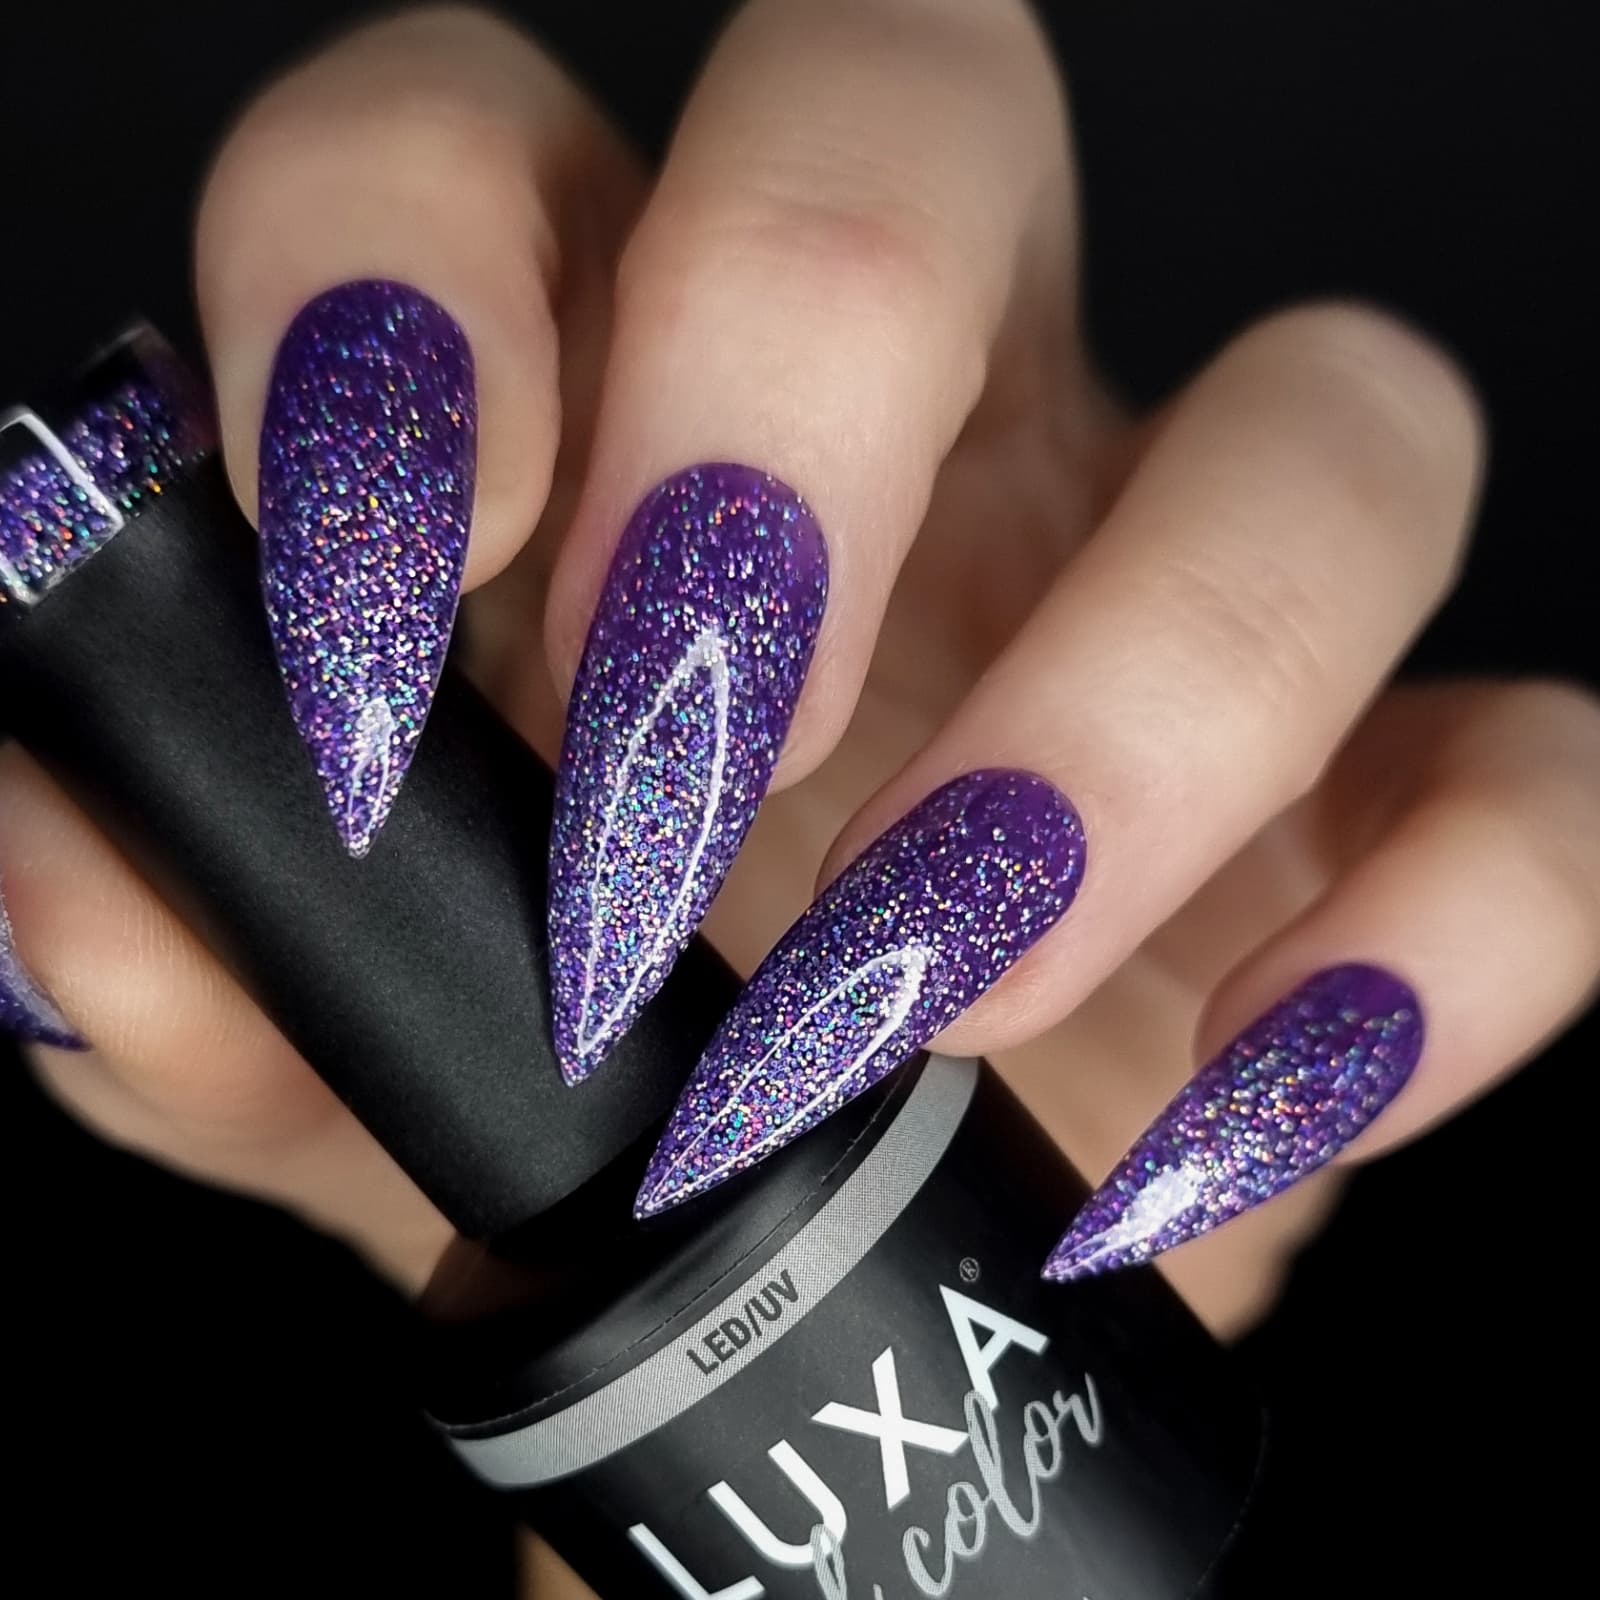 Luxapolish Violet Pulse